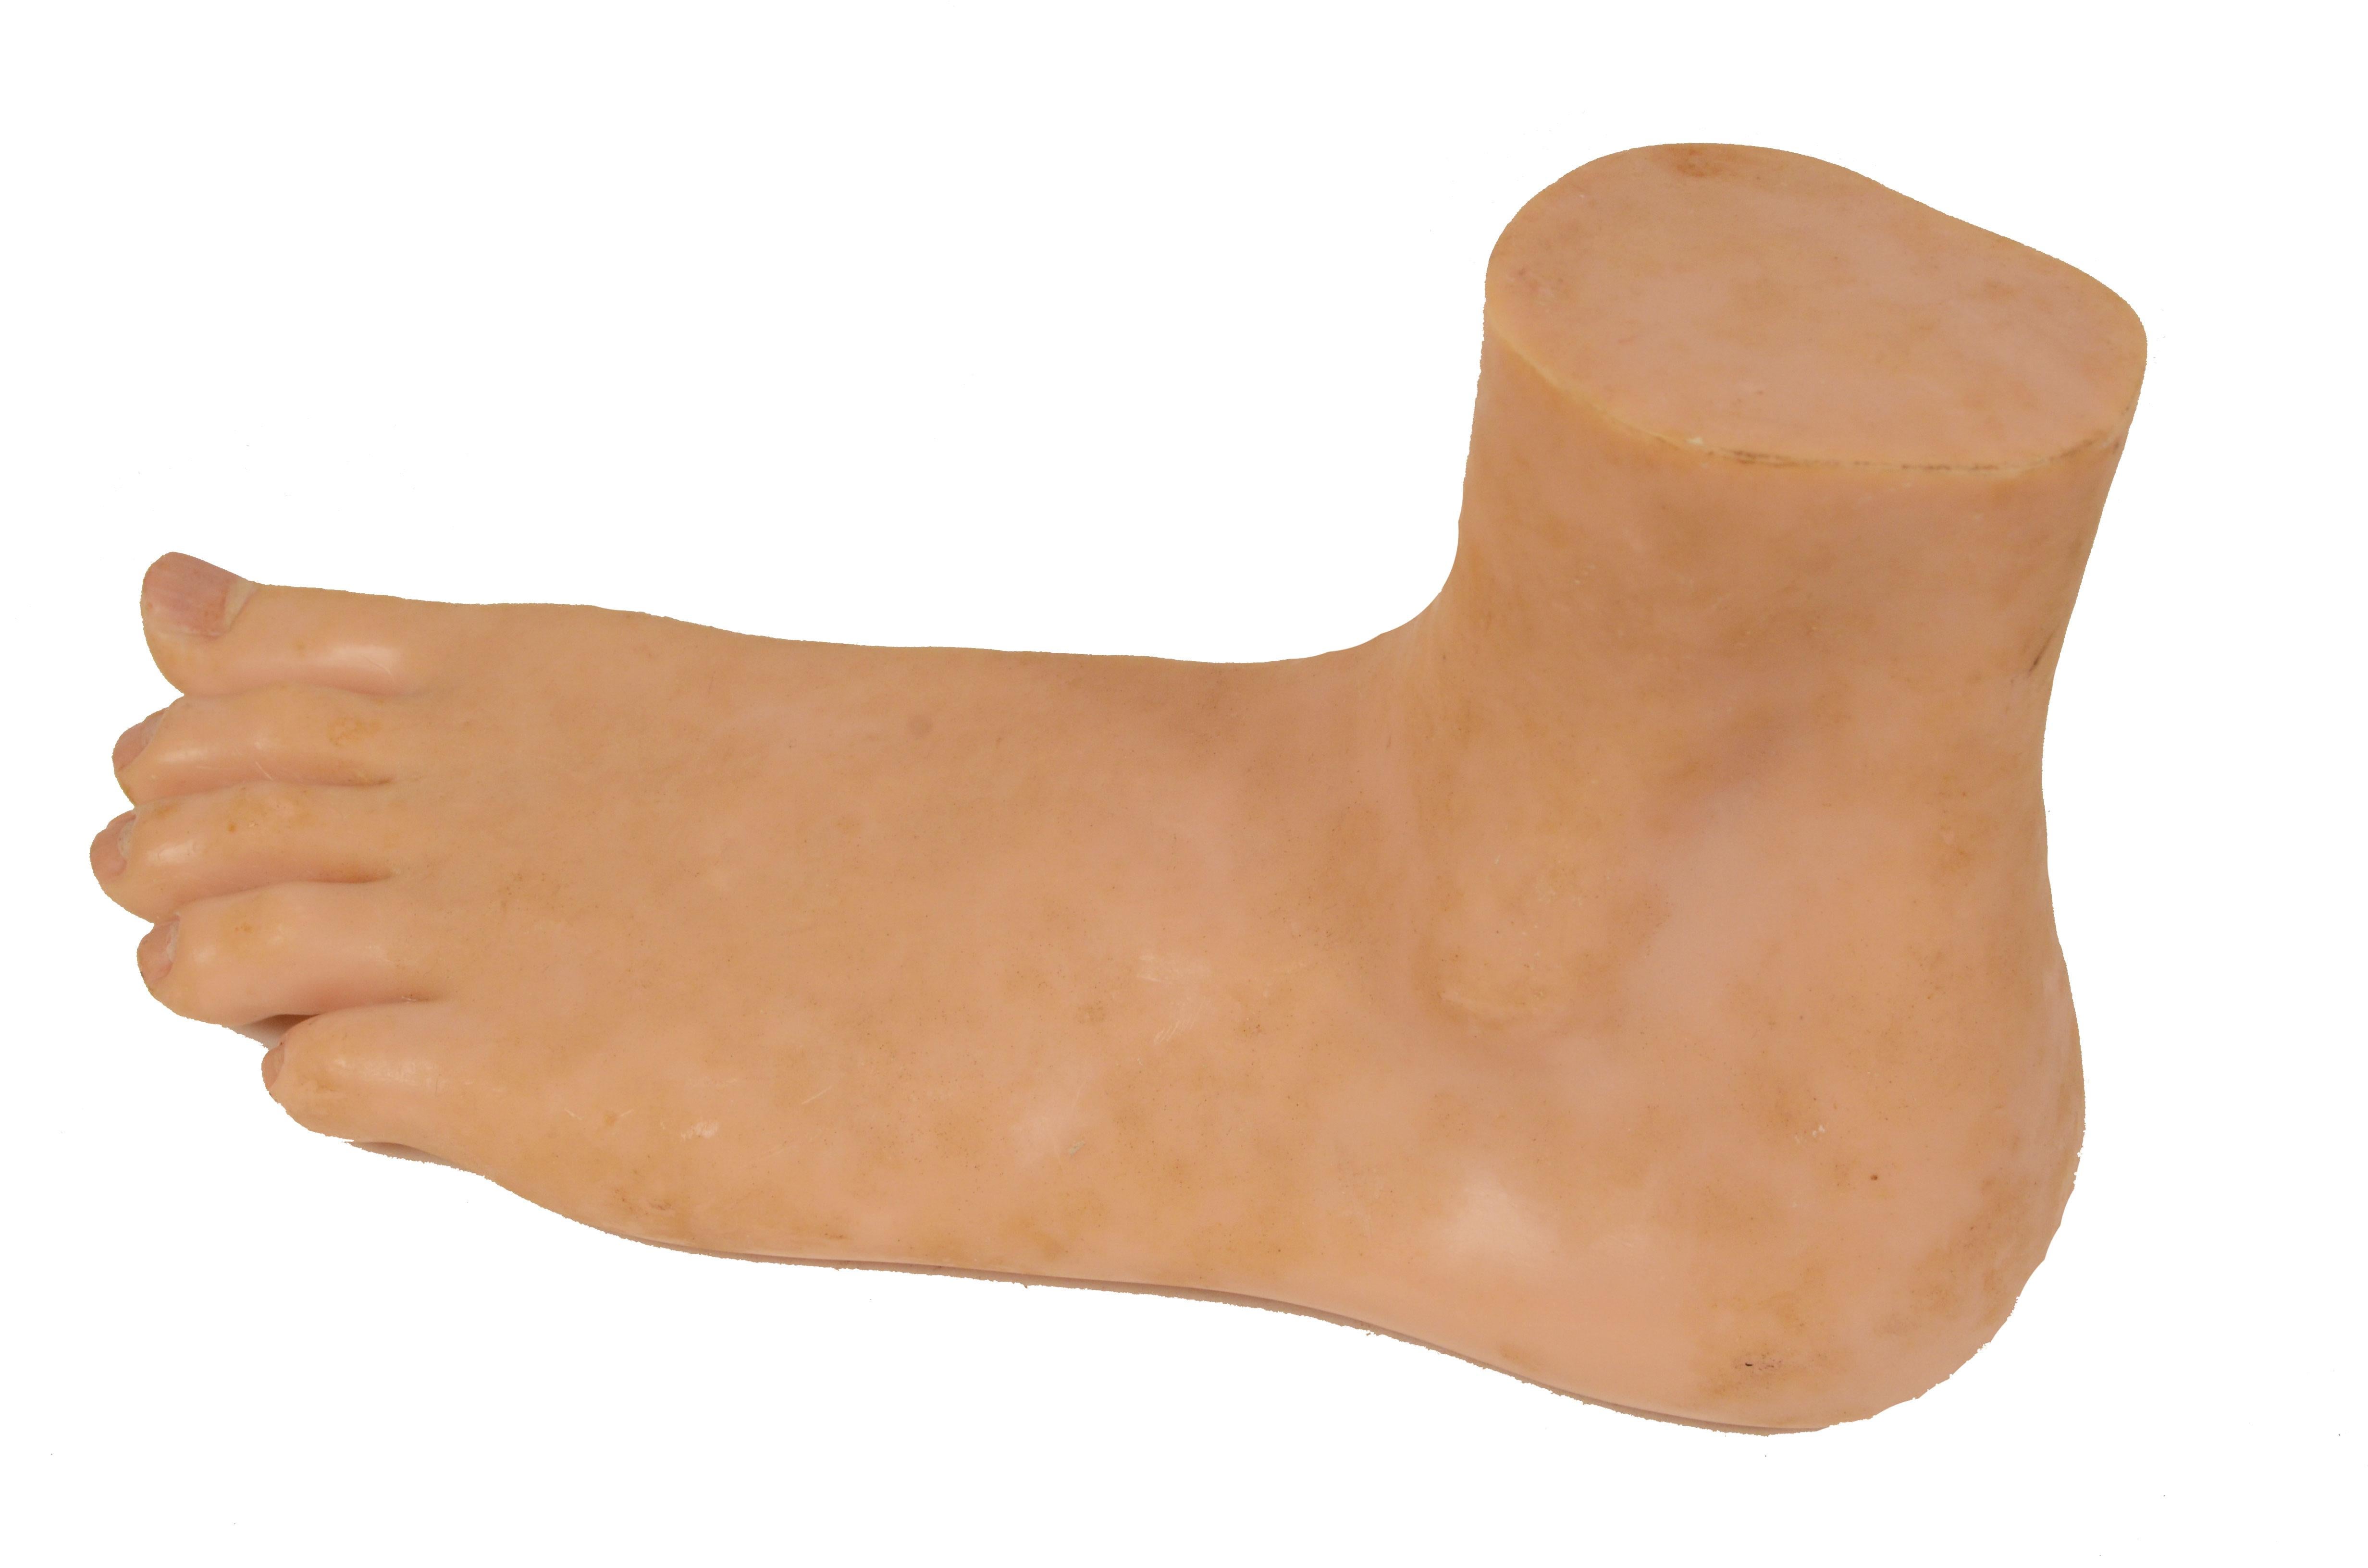 Plastic 1950s Anatomical Teaching Model of Normal Size Depicting Flat Foot 